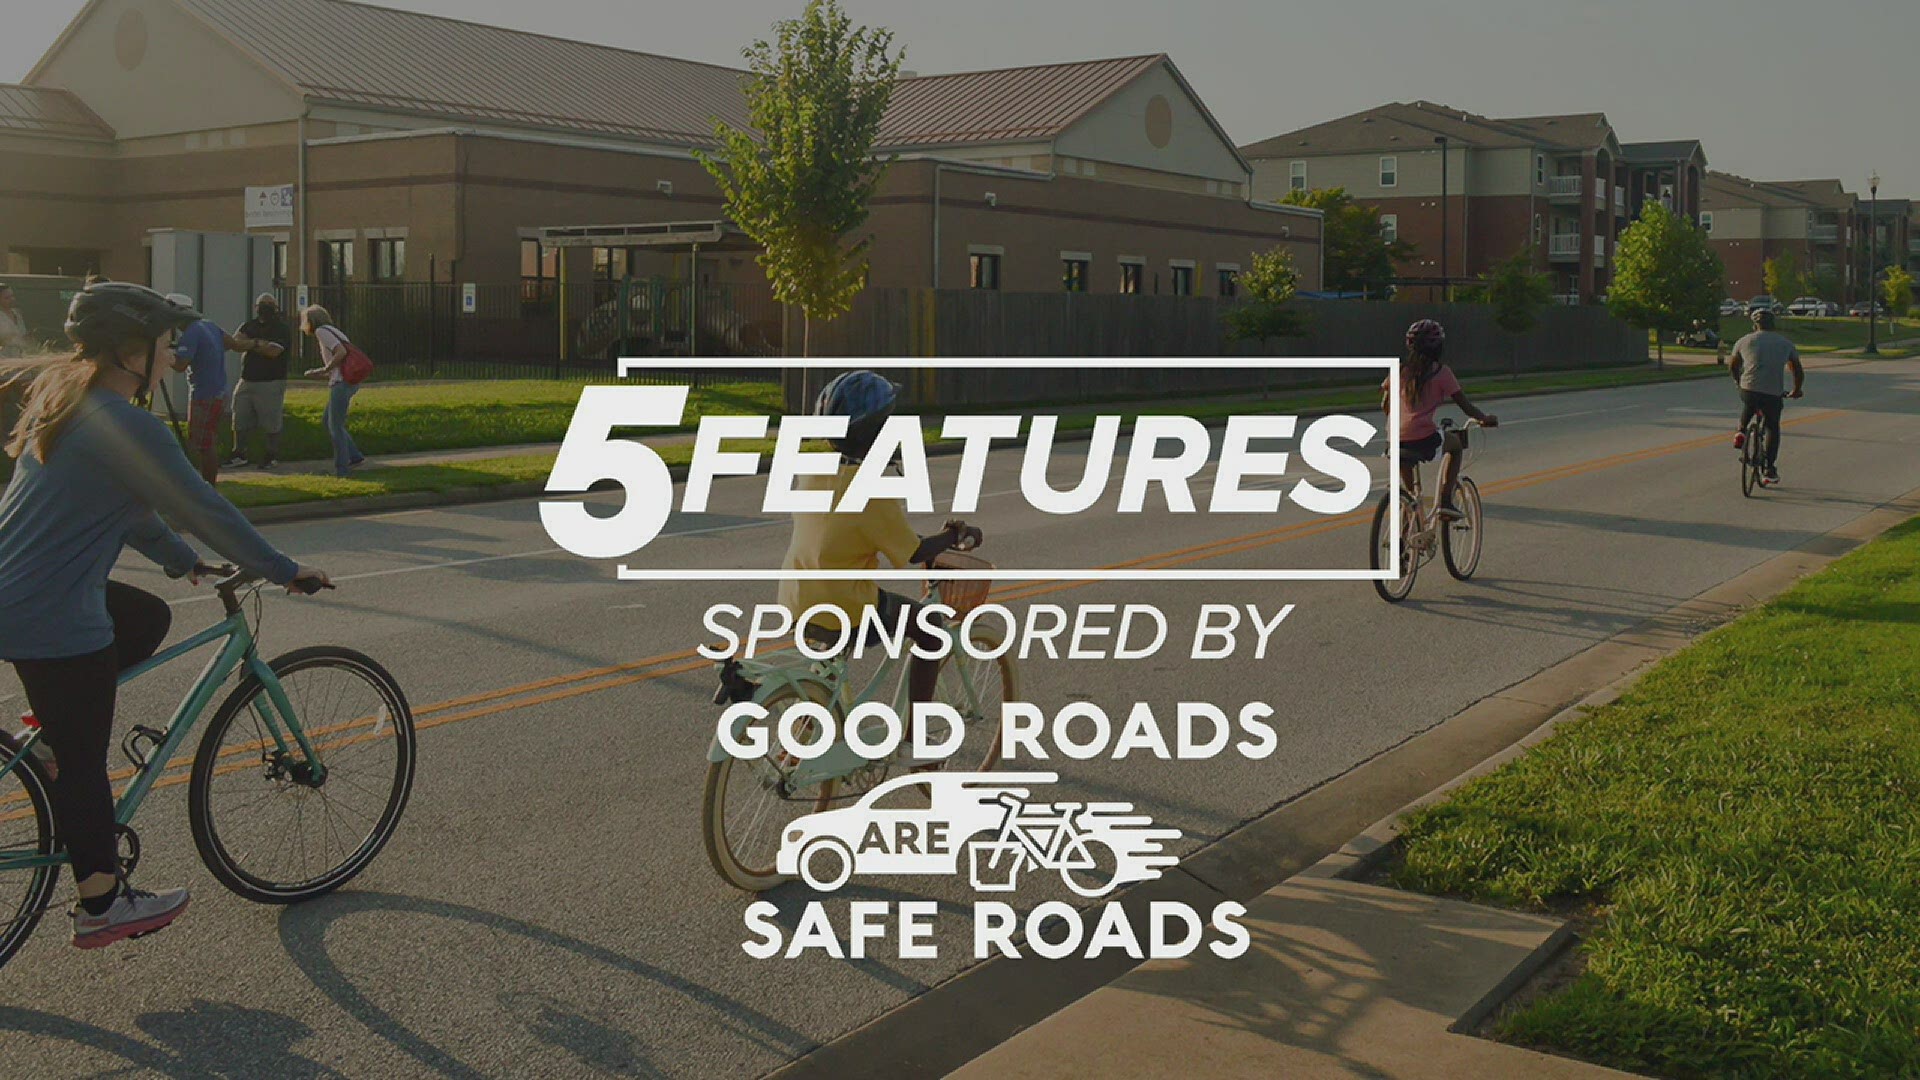 Sponsored by: Good Roads are Safe Roads